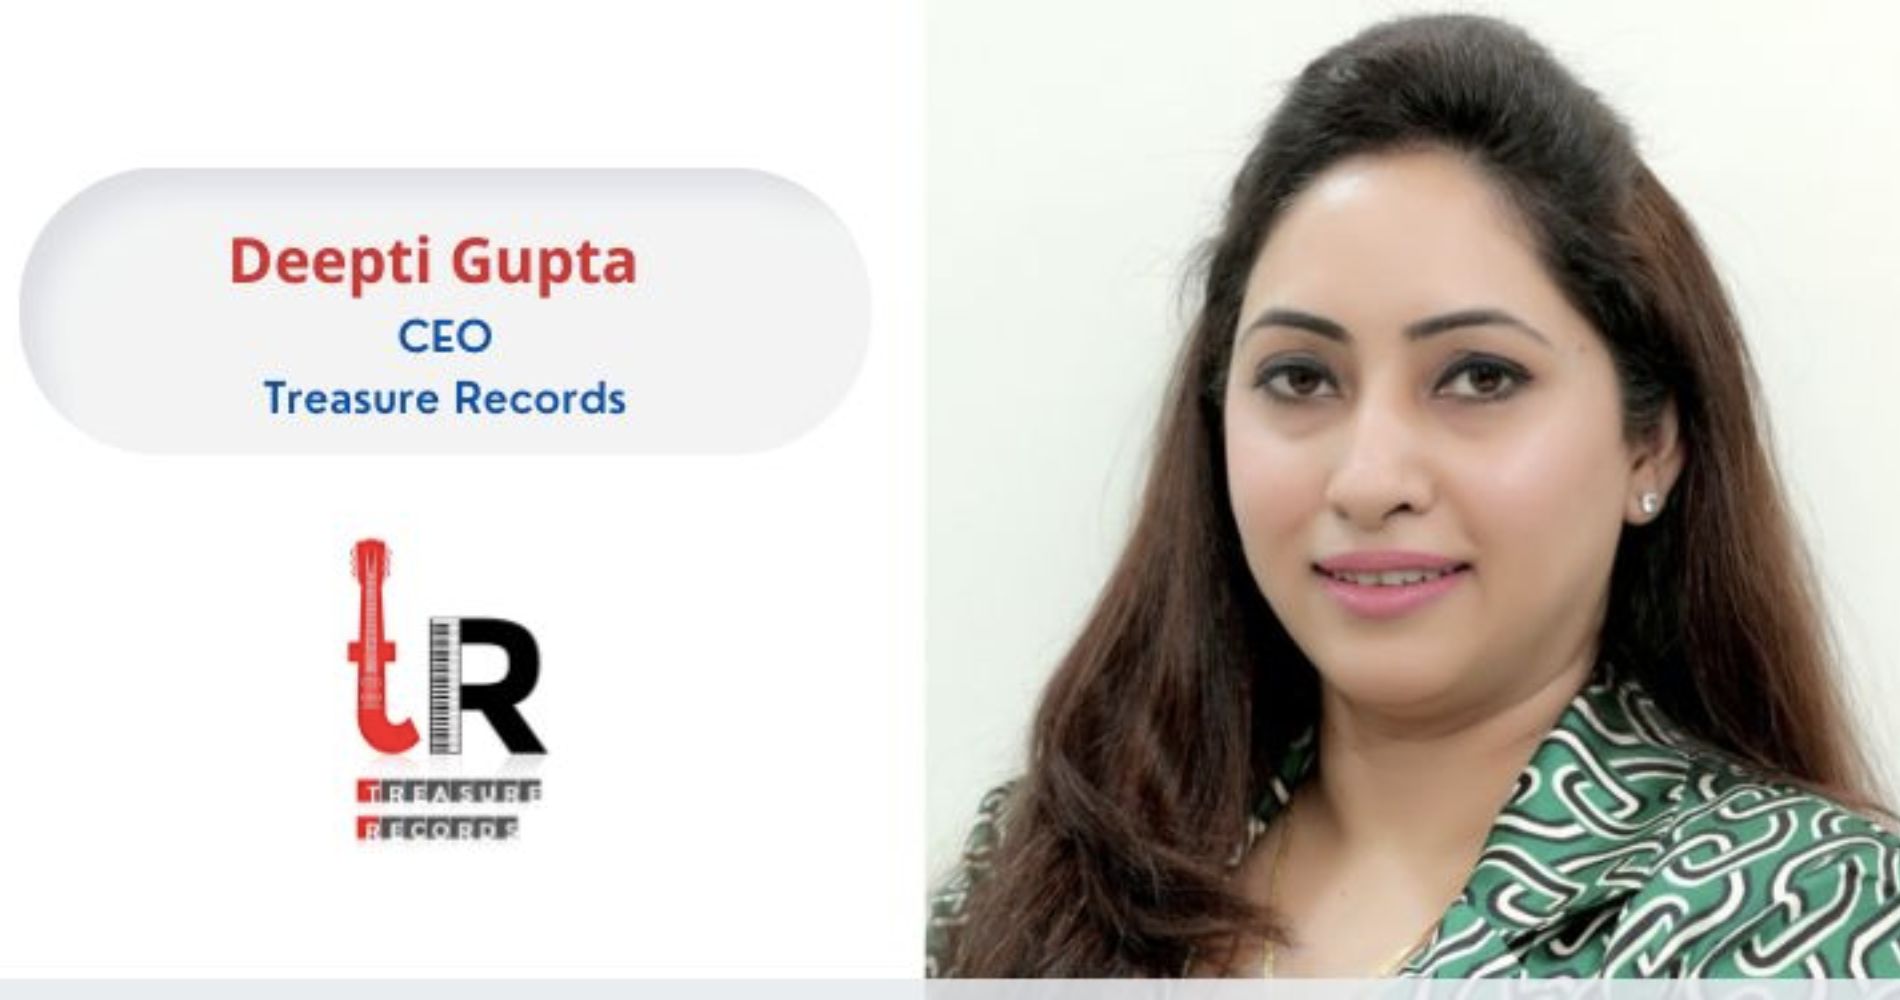 Journey from Logistics Industry Employee to the Founder of a Music Label Company-Deepti Gupta, CEO, Treasure Records